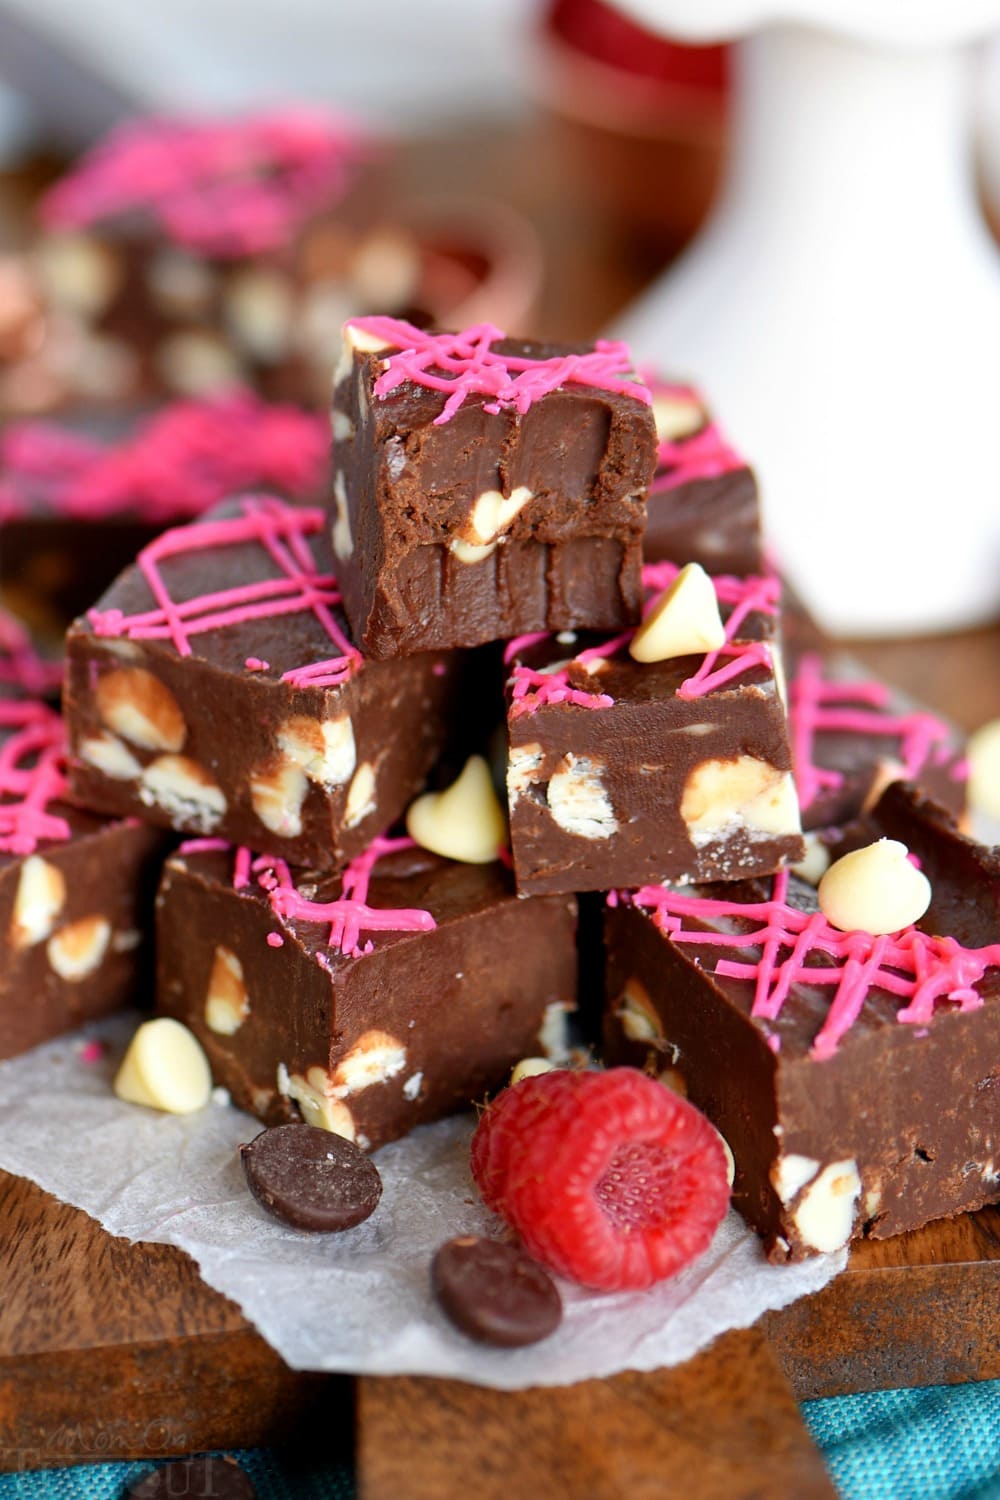 Fudge doesn’t get better or easier than this Dark Chocolate Raspberry Fudge. It’s the perfect quick treat for any occasion! Incredibly decadent and gorgeous to boot this easy fudge recipe takes just 5 minutes to make! Made with raspberry jam.